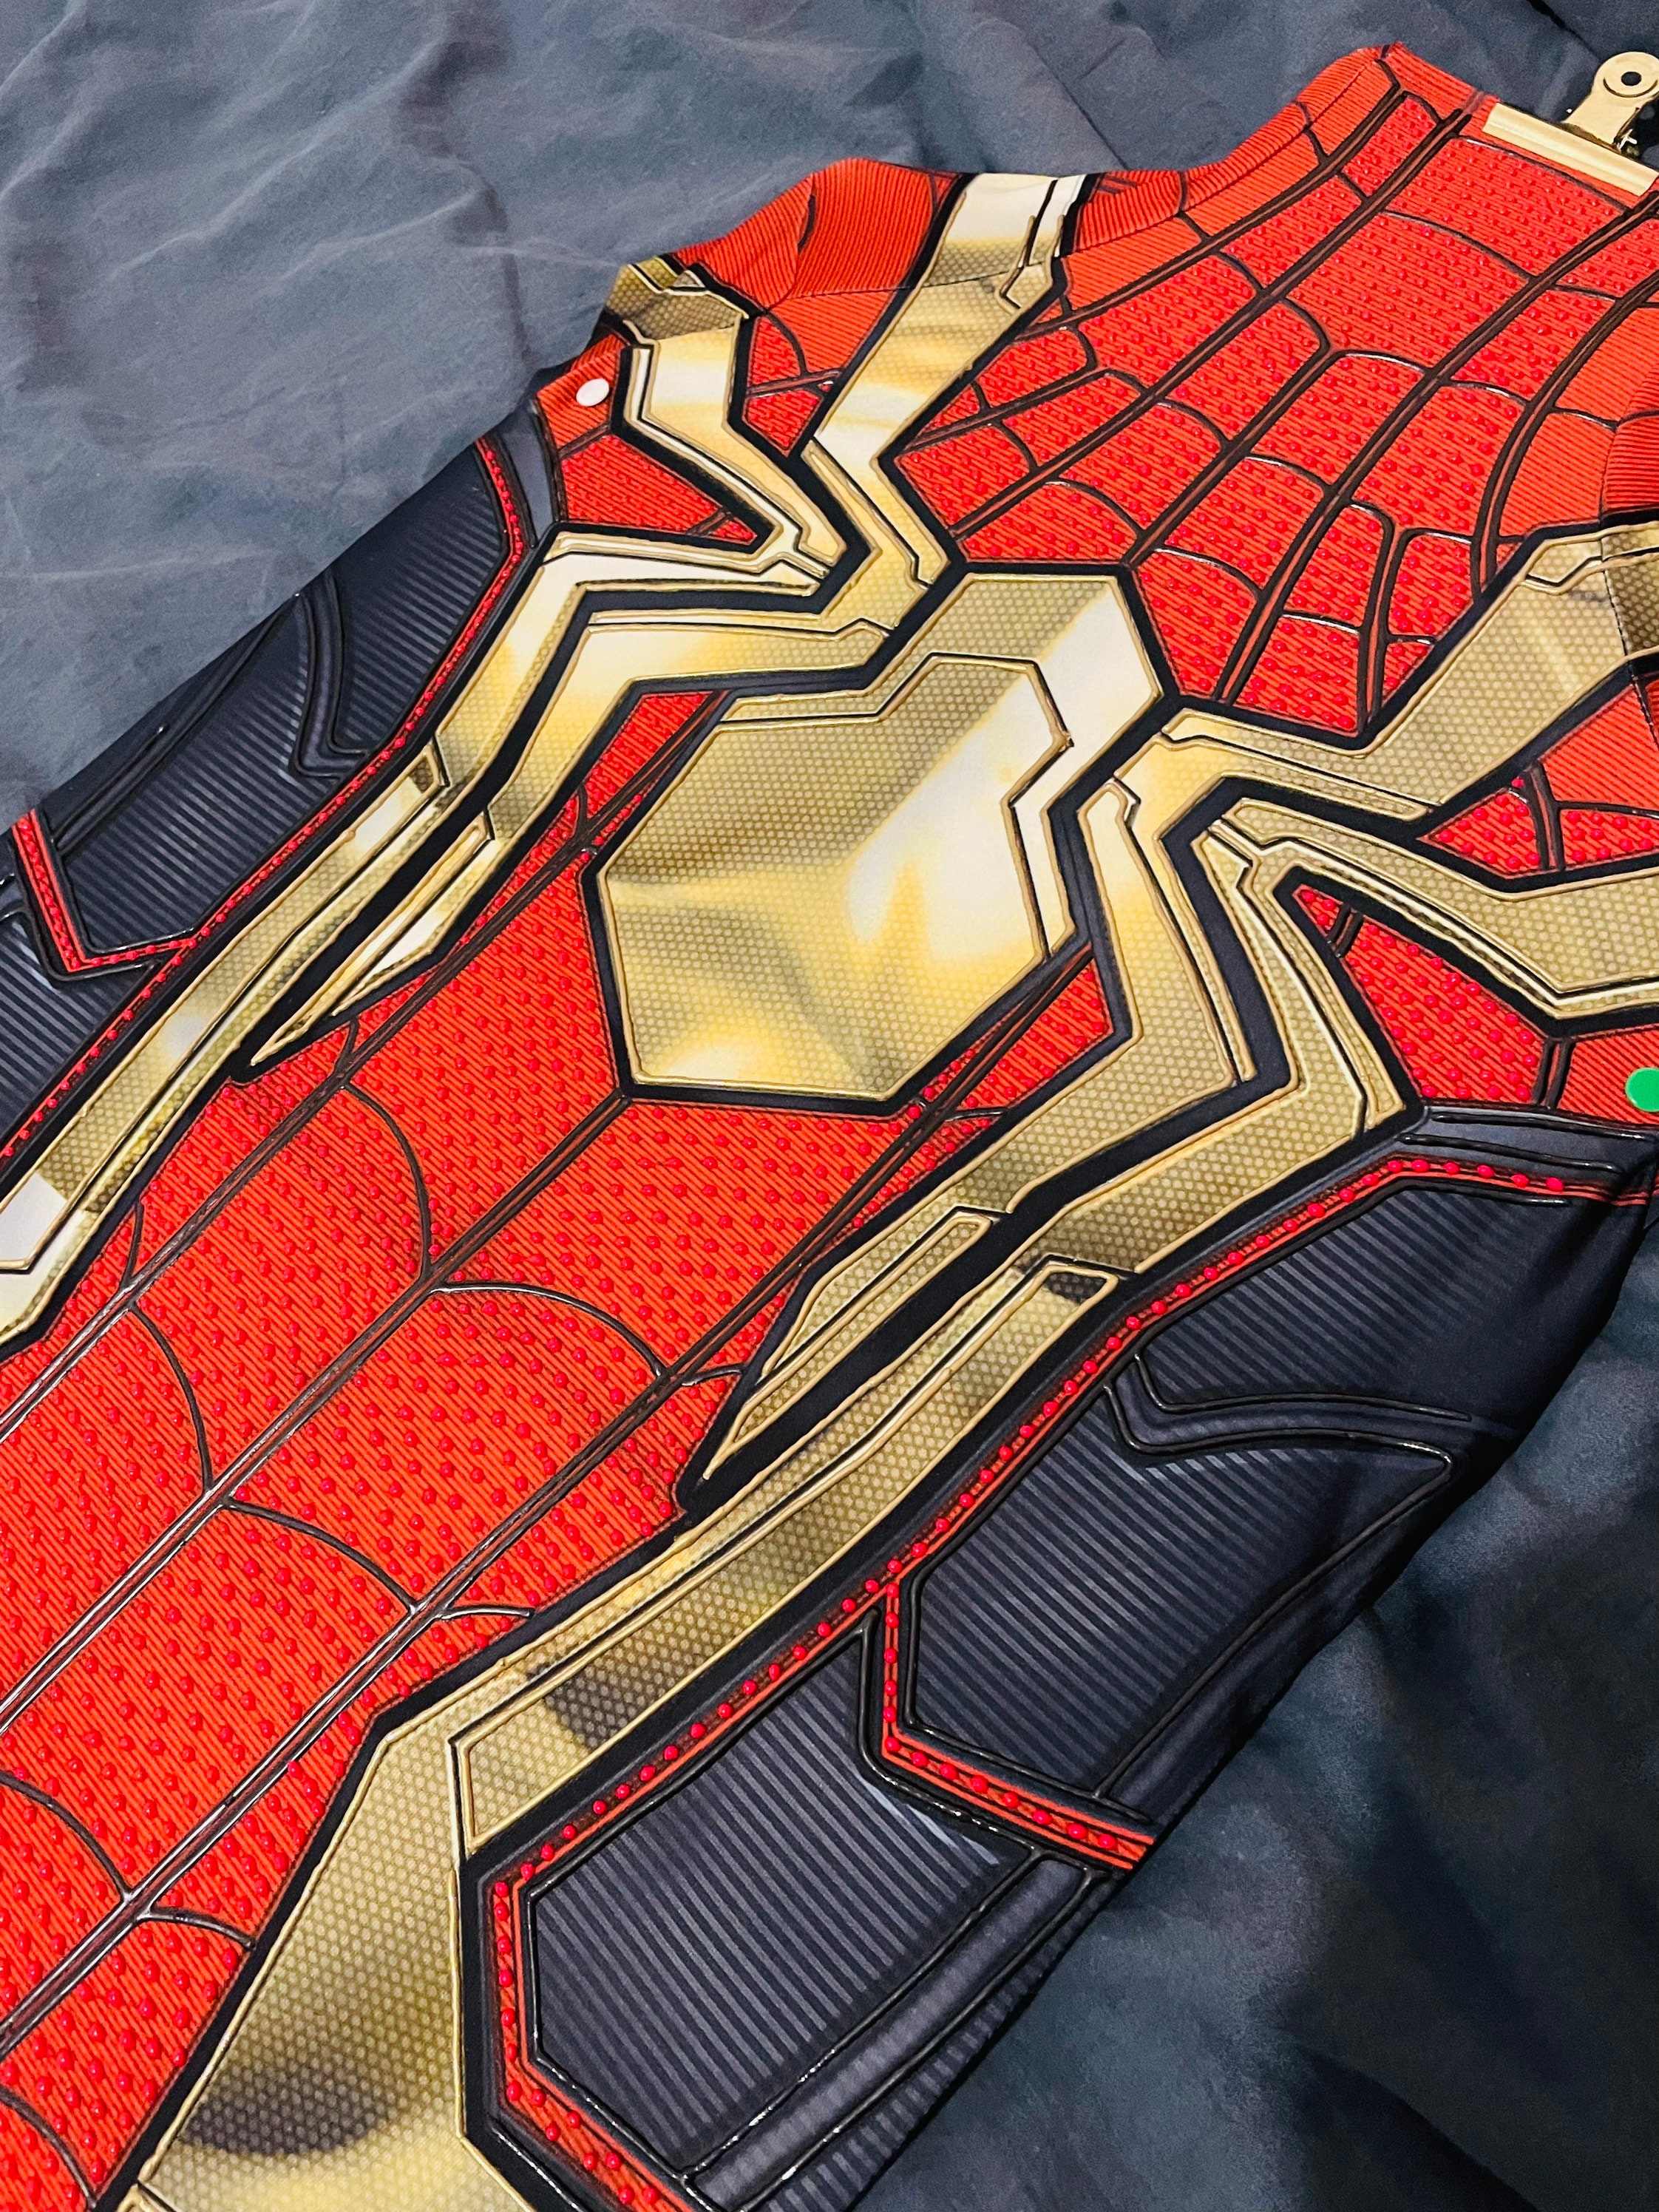 How does Spider-Man get the iron spider suit in Avengers: Infinity War? -  Quora